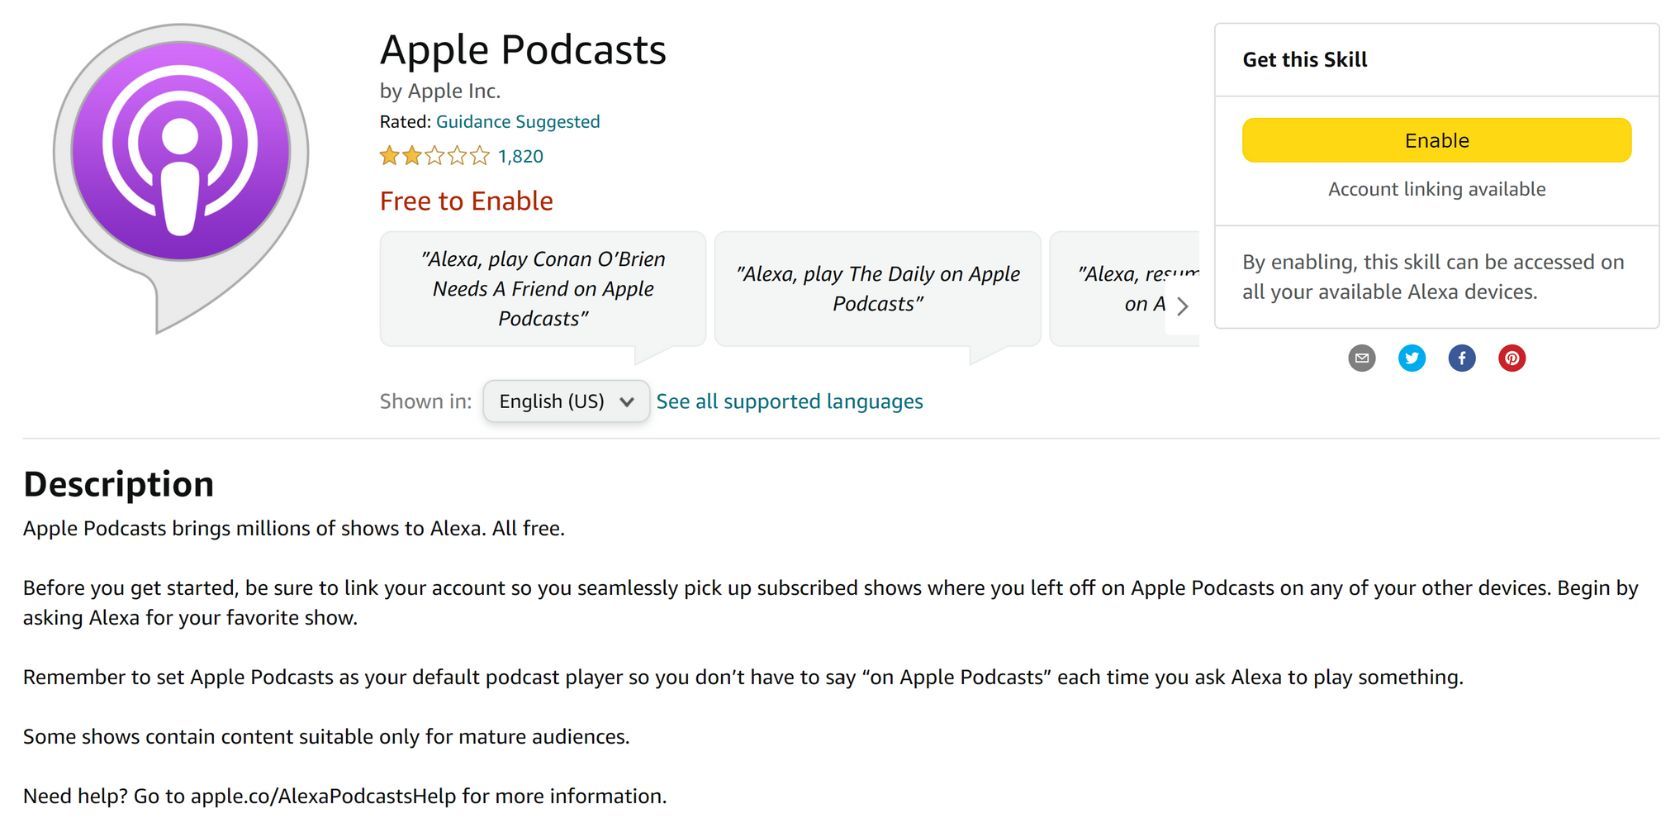 apple podcasts alexa skill details page